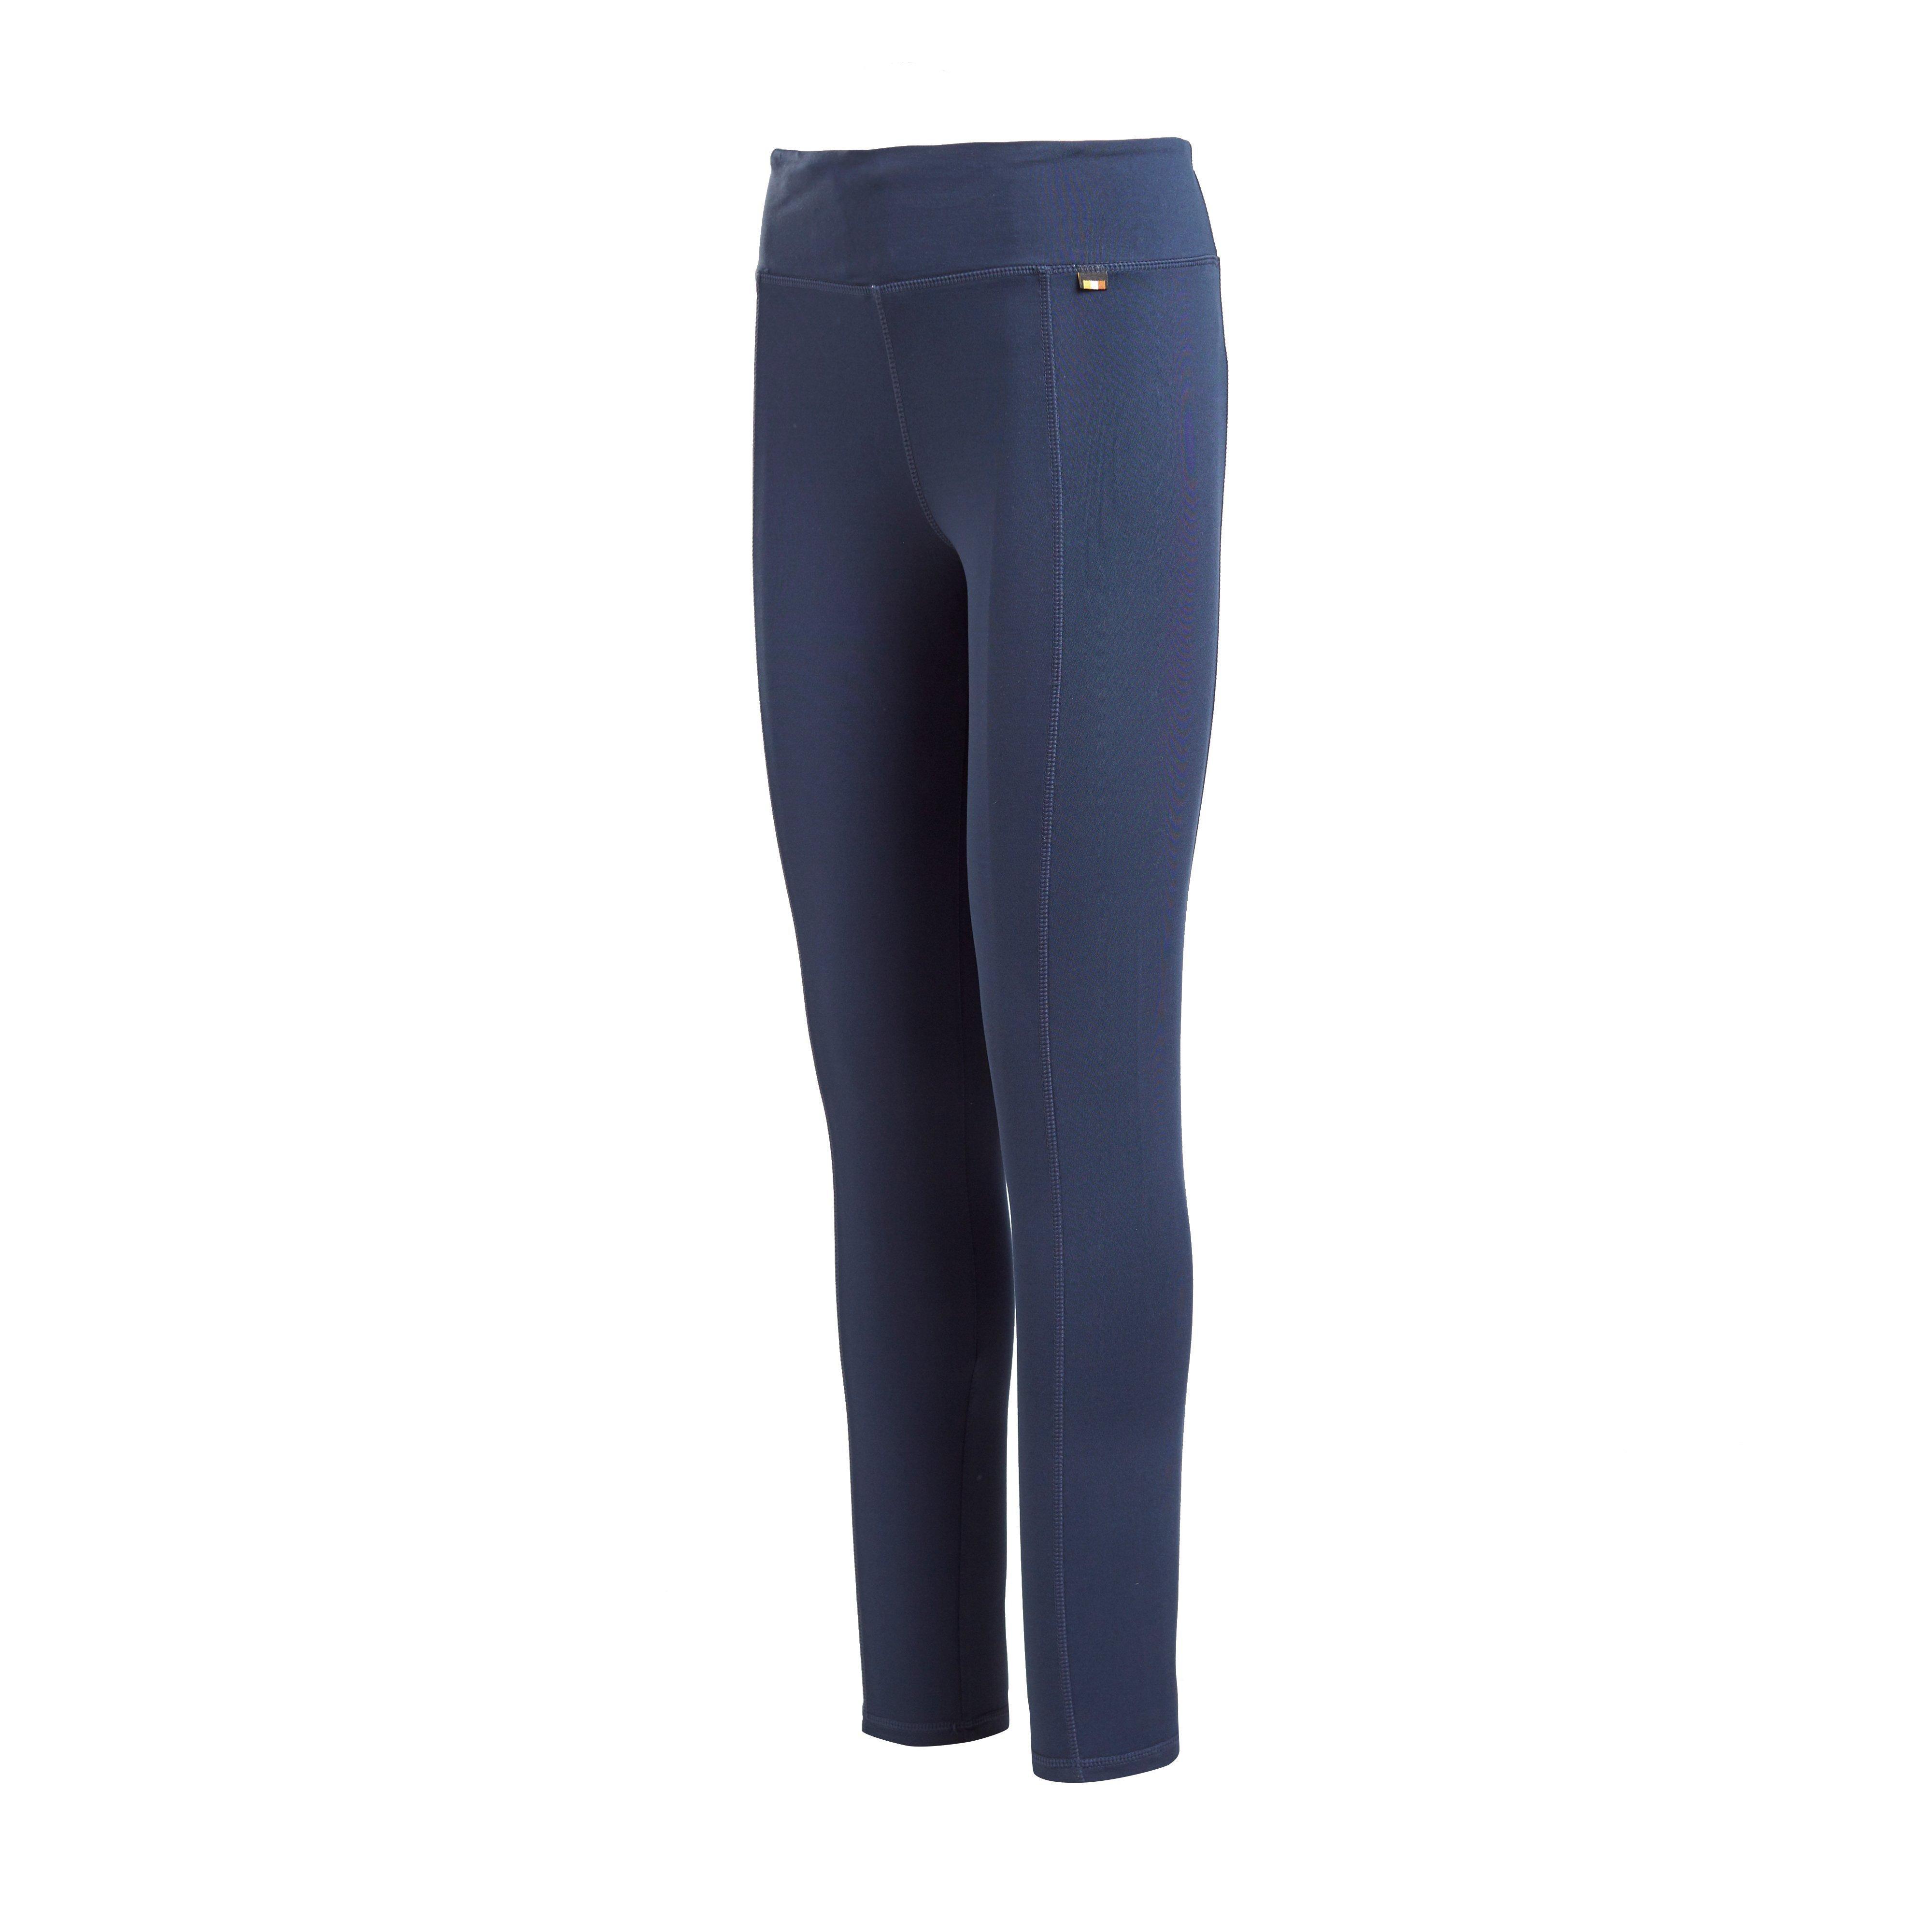 Craghoppers Women's Velocity Tights Review